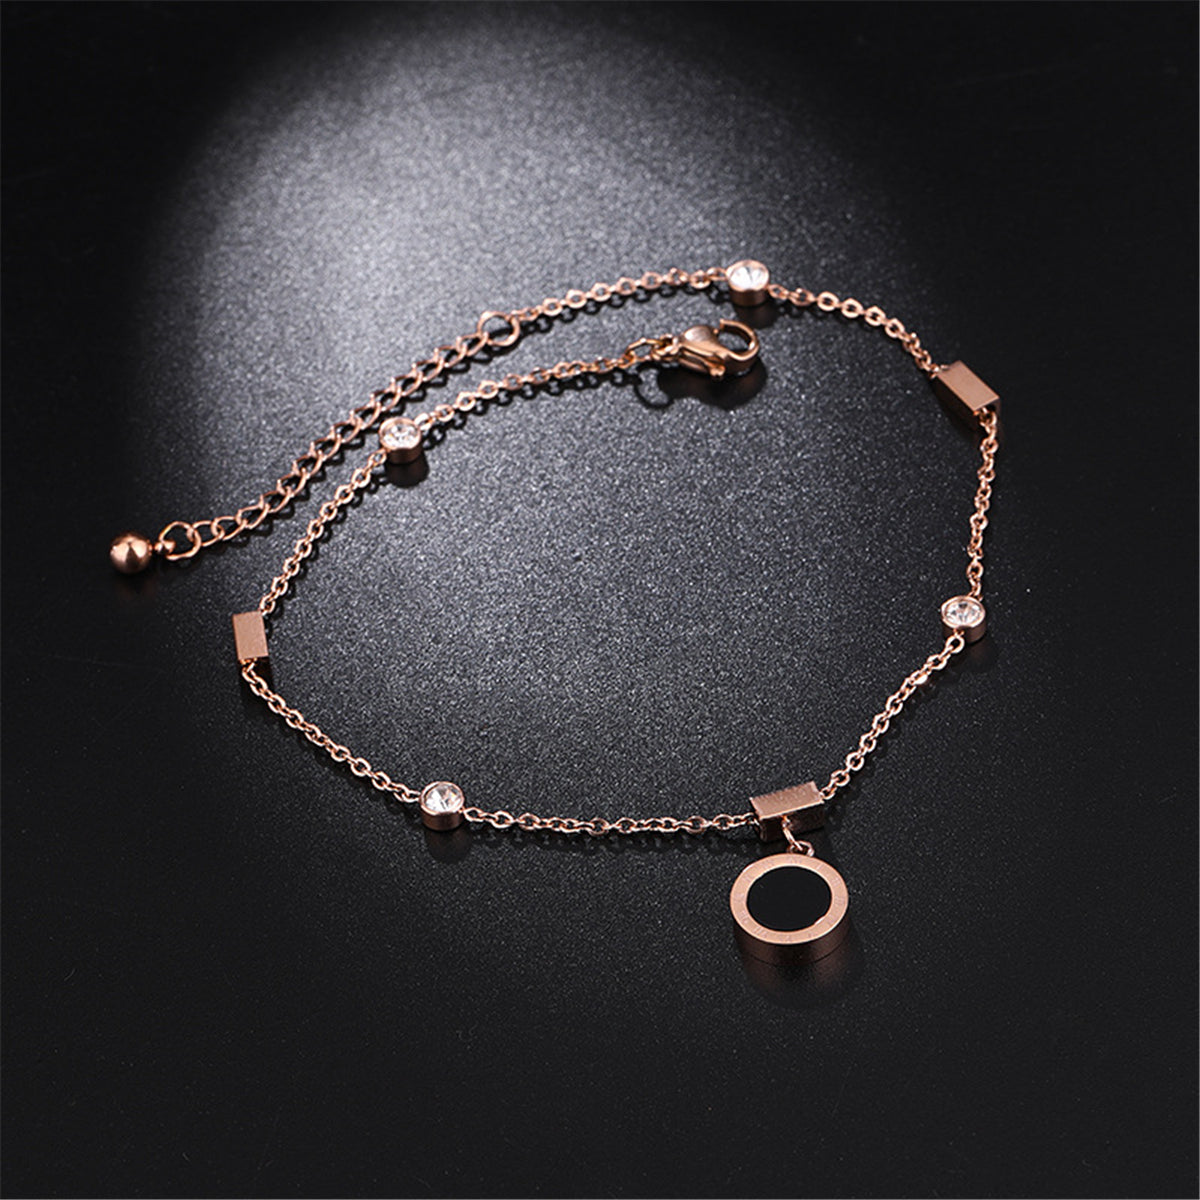 18K Rose Gold-Plated Roman Numeral Charm Anklet